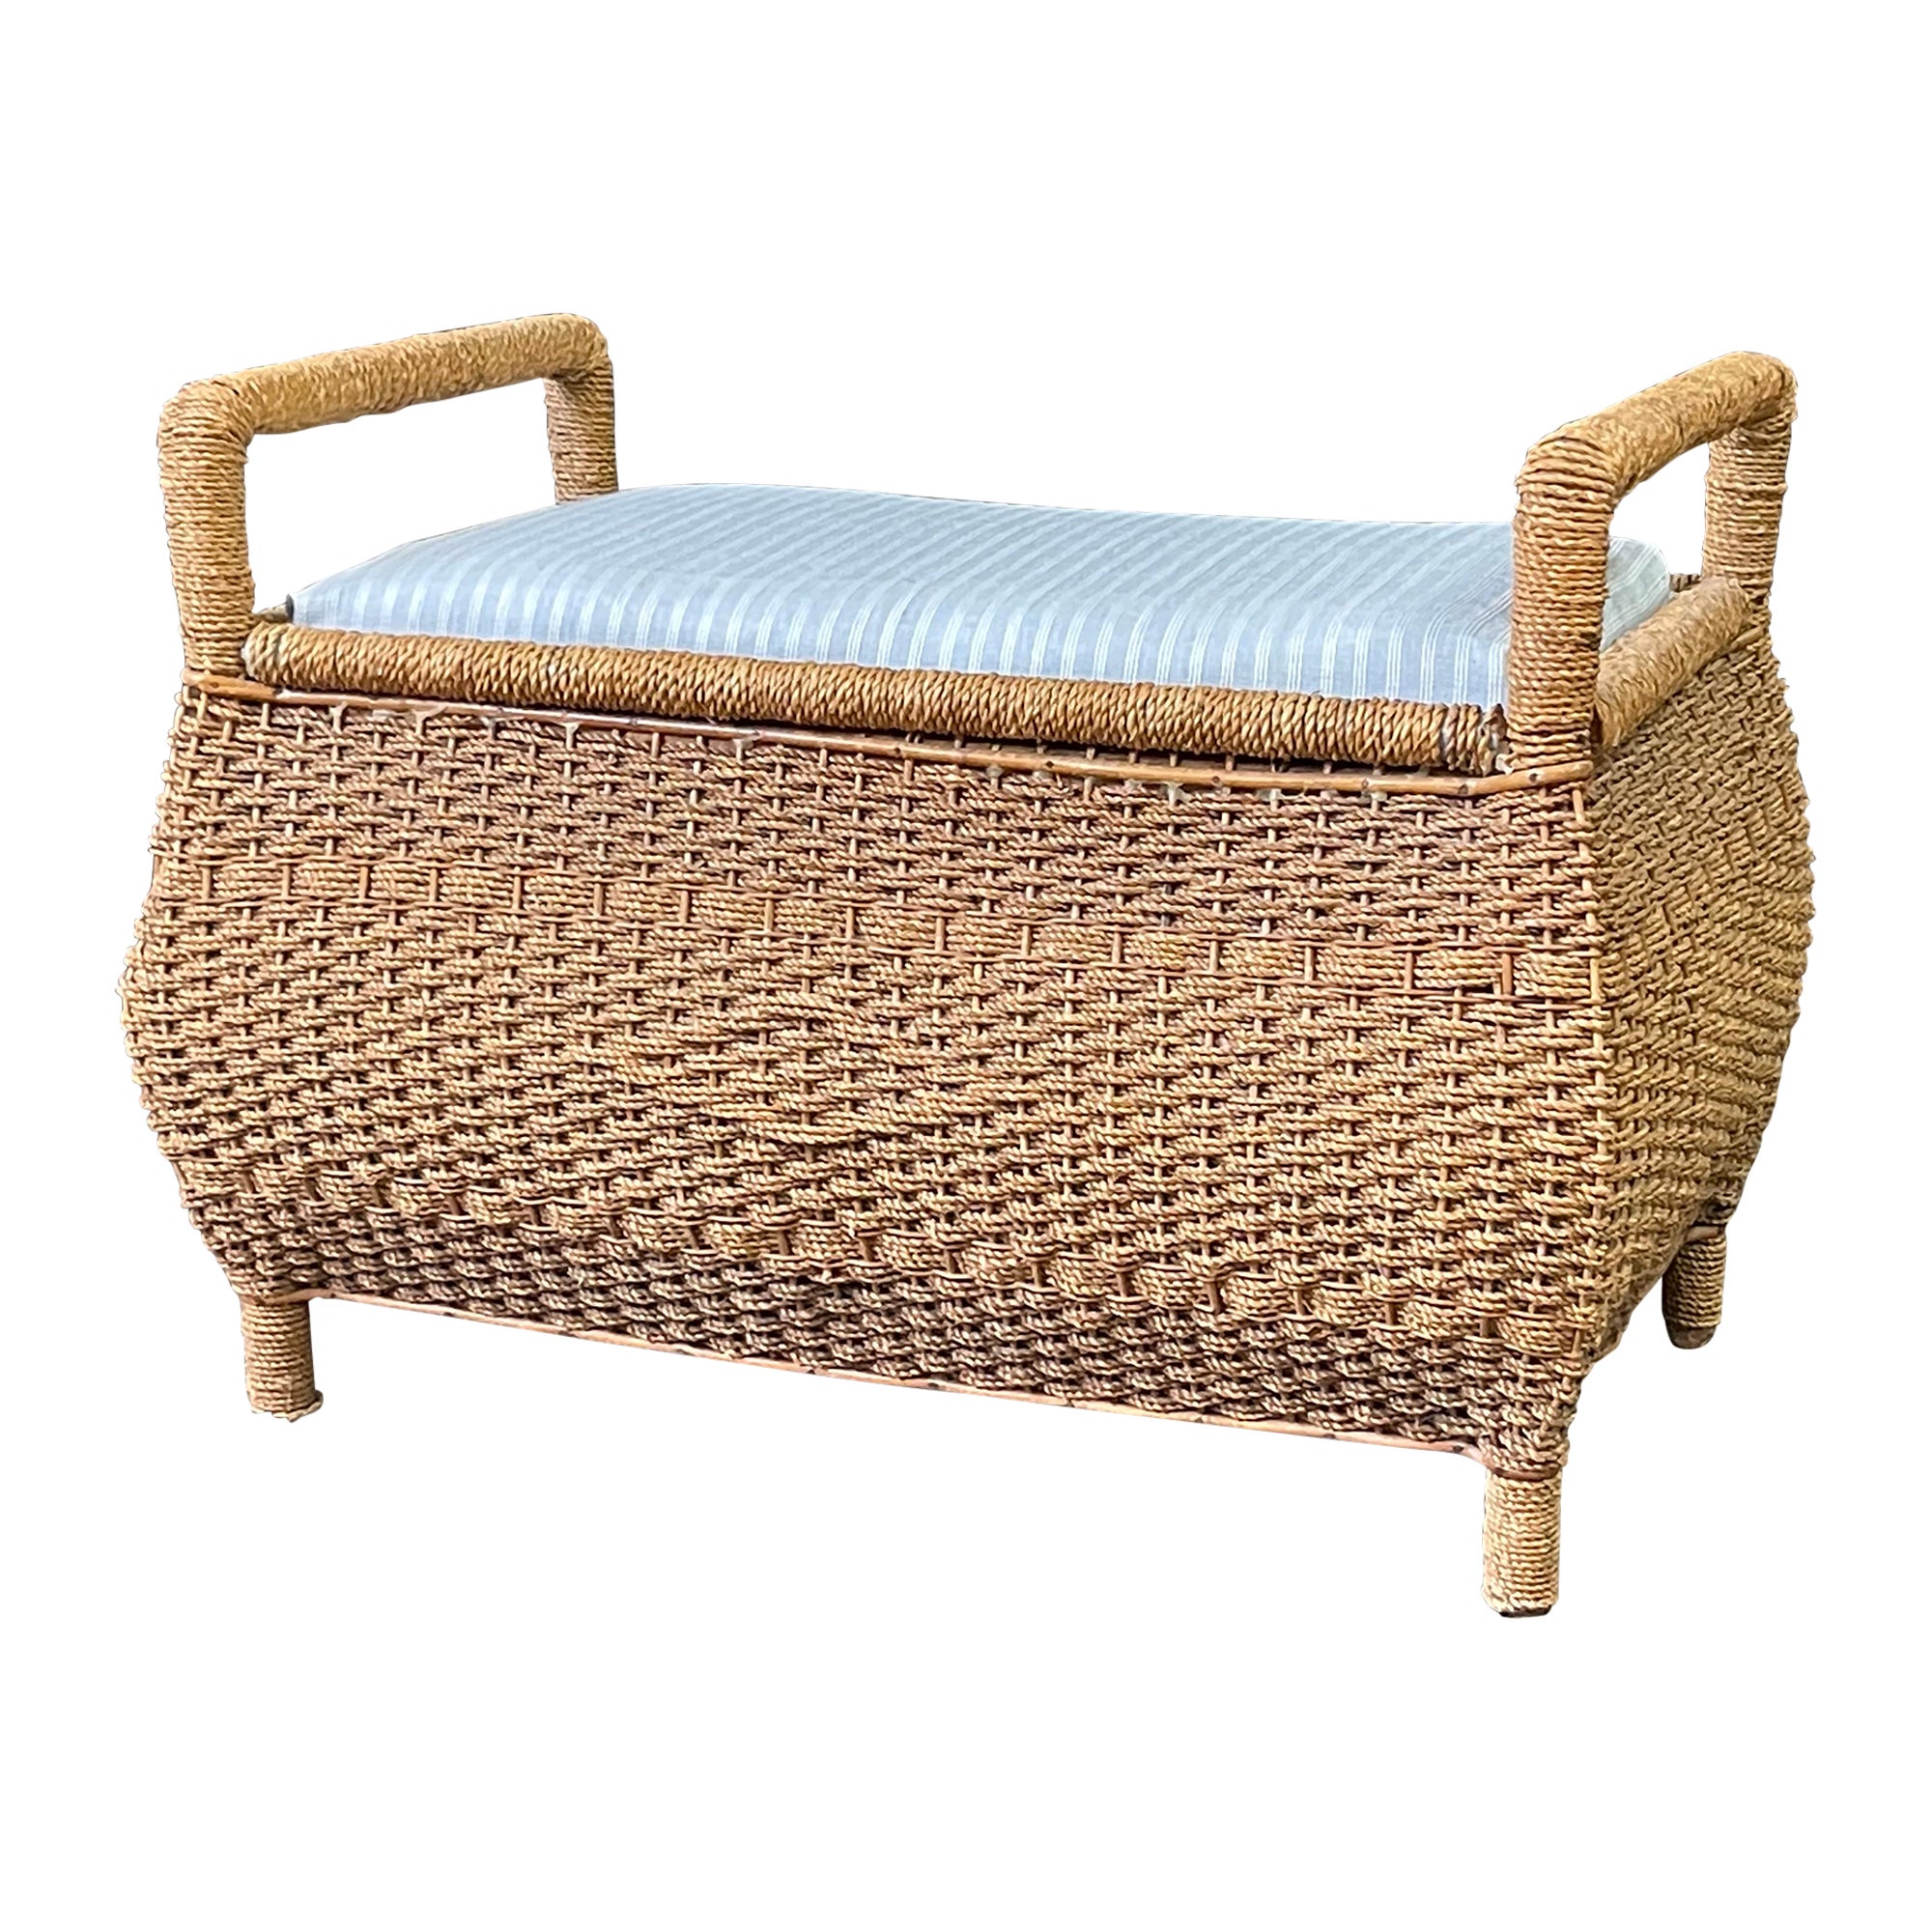 English Bombay-Shaped Woven Rattan Bench For Sale